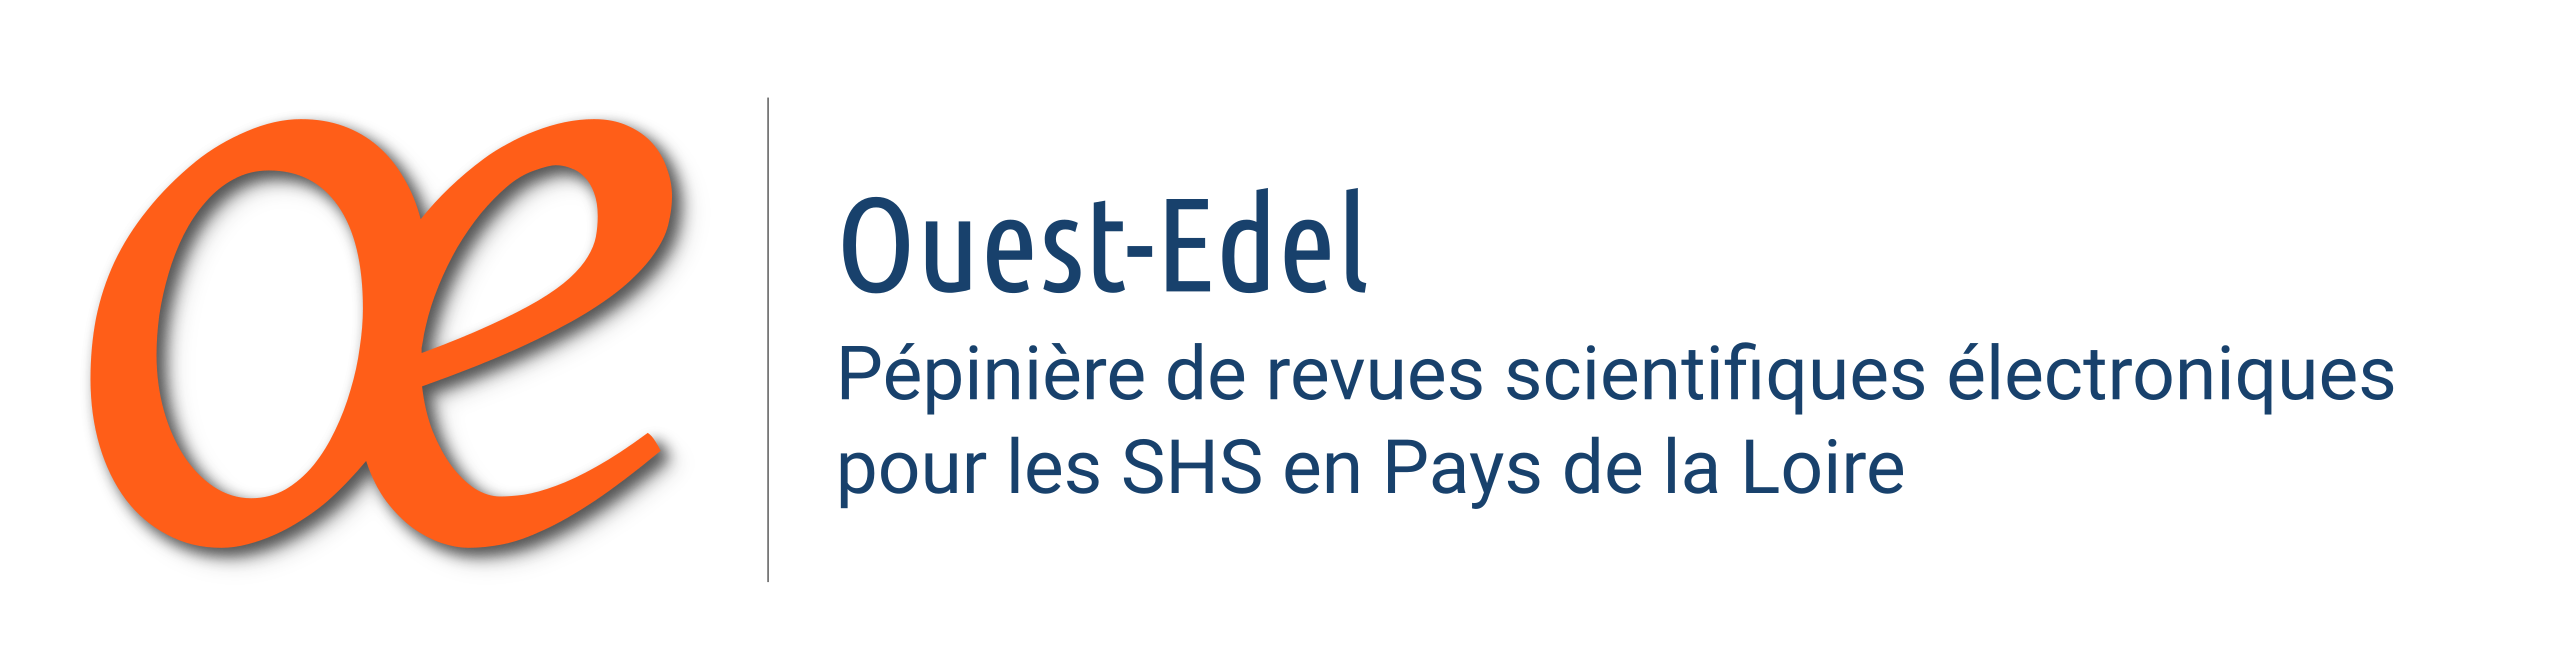 Ouest-Edel